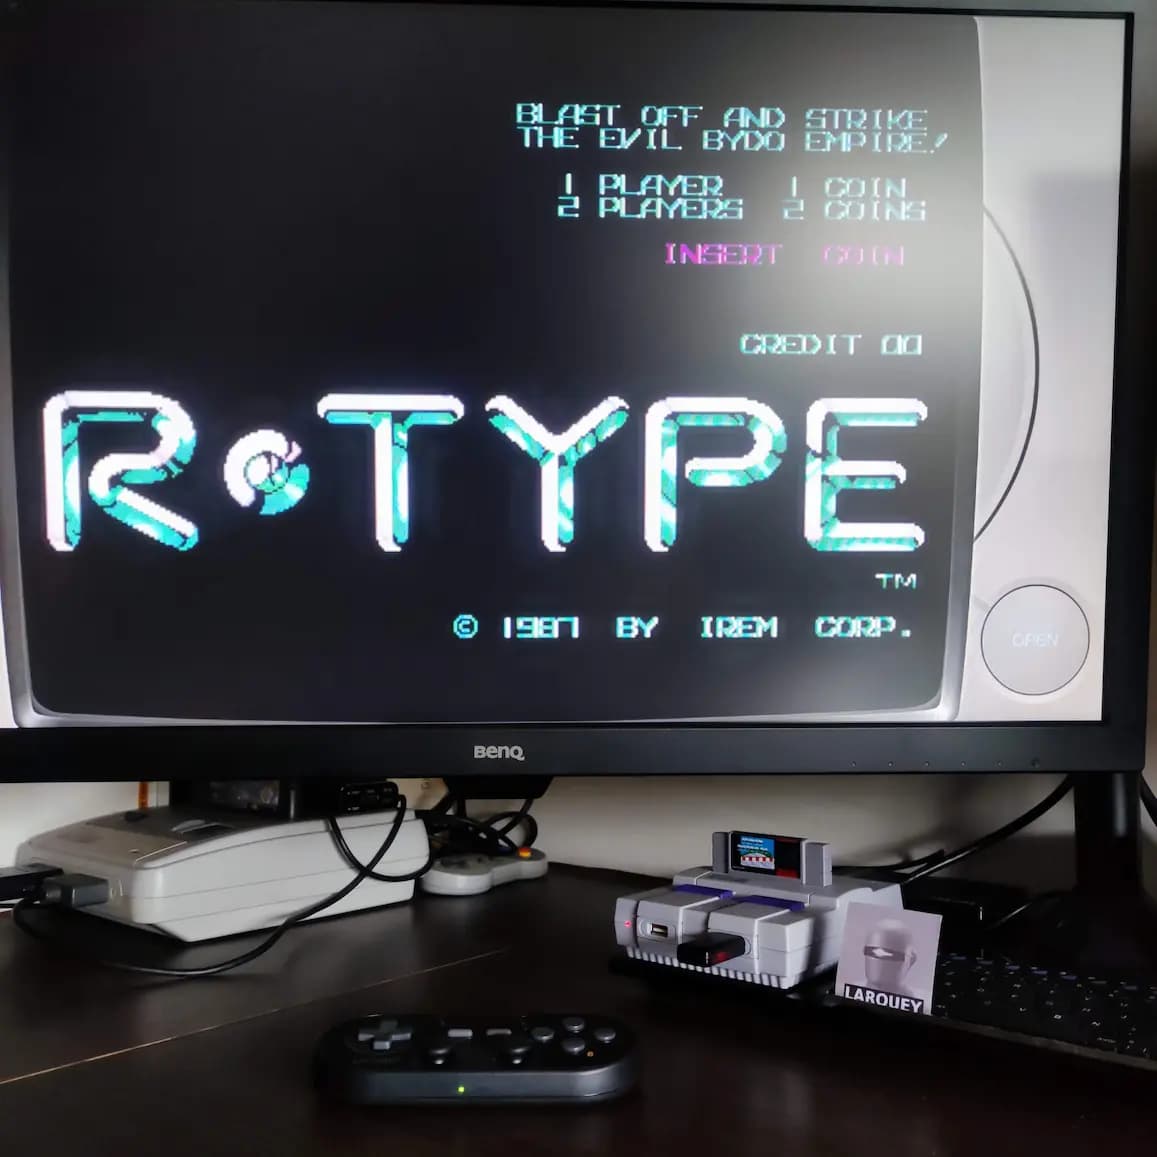 Larquey: R-Types: R-Type [2 Lives/Hard] (Playstation 1 Emulated) 40,600 points on 2022-09-04 06:19:14